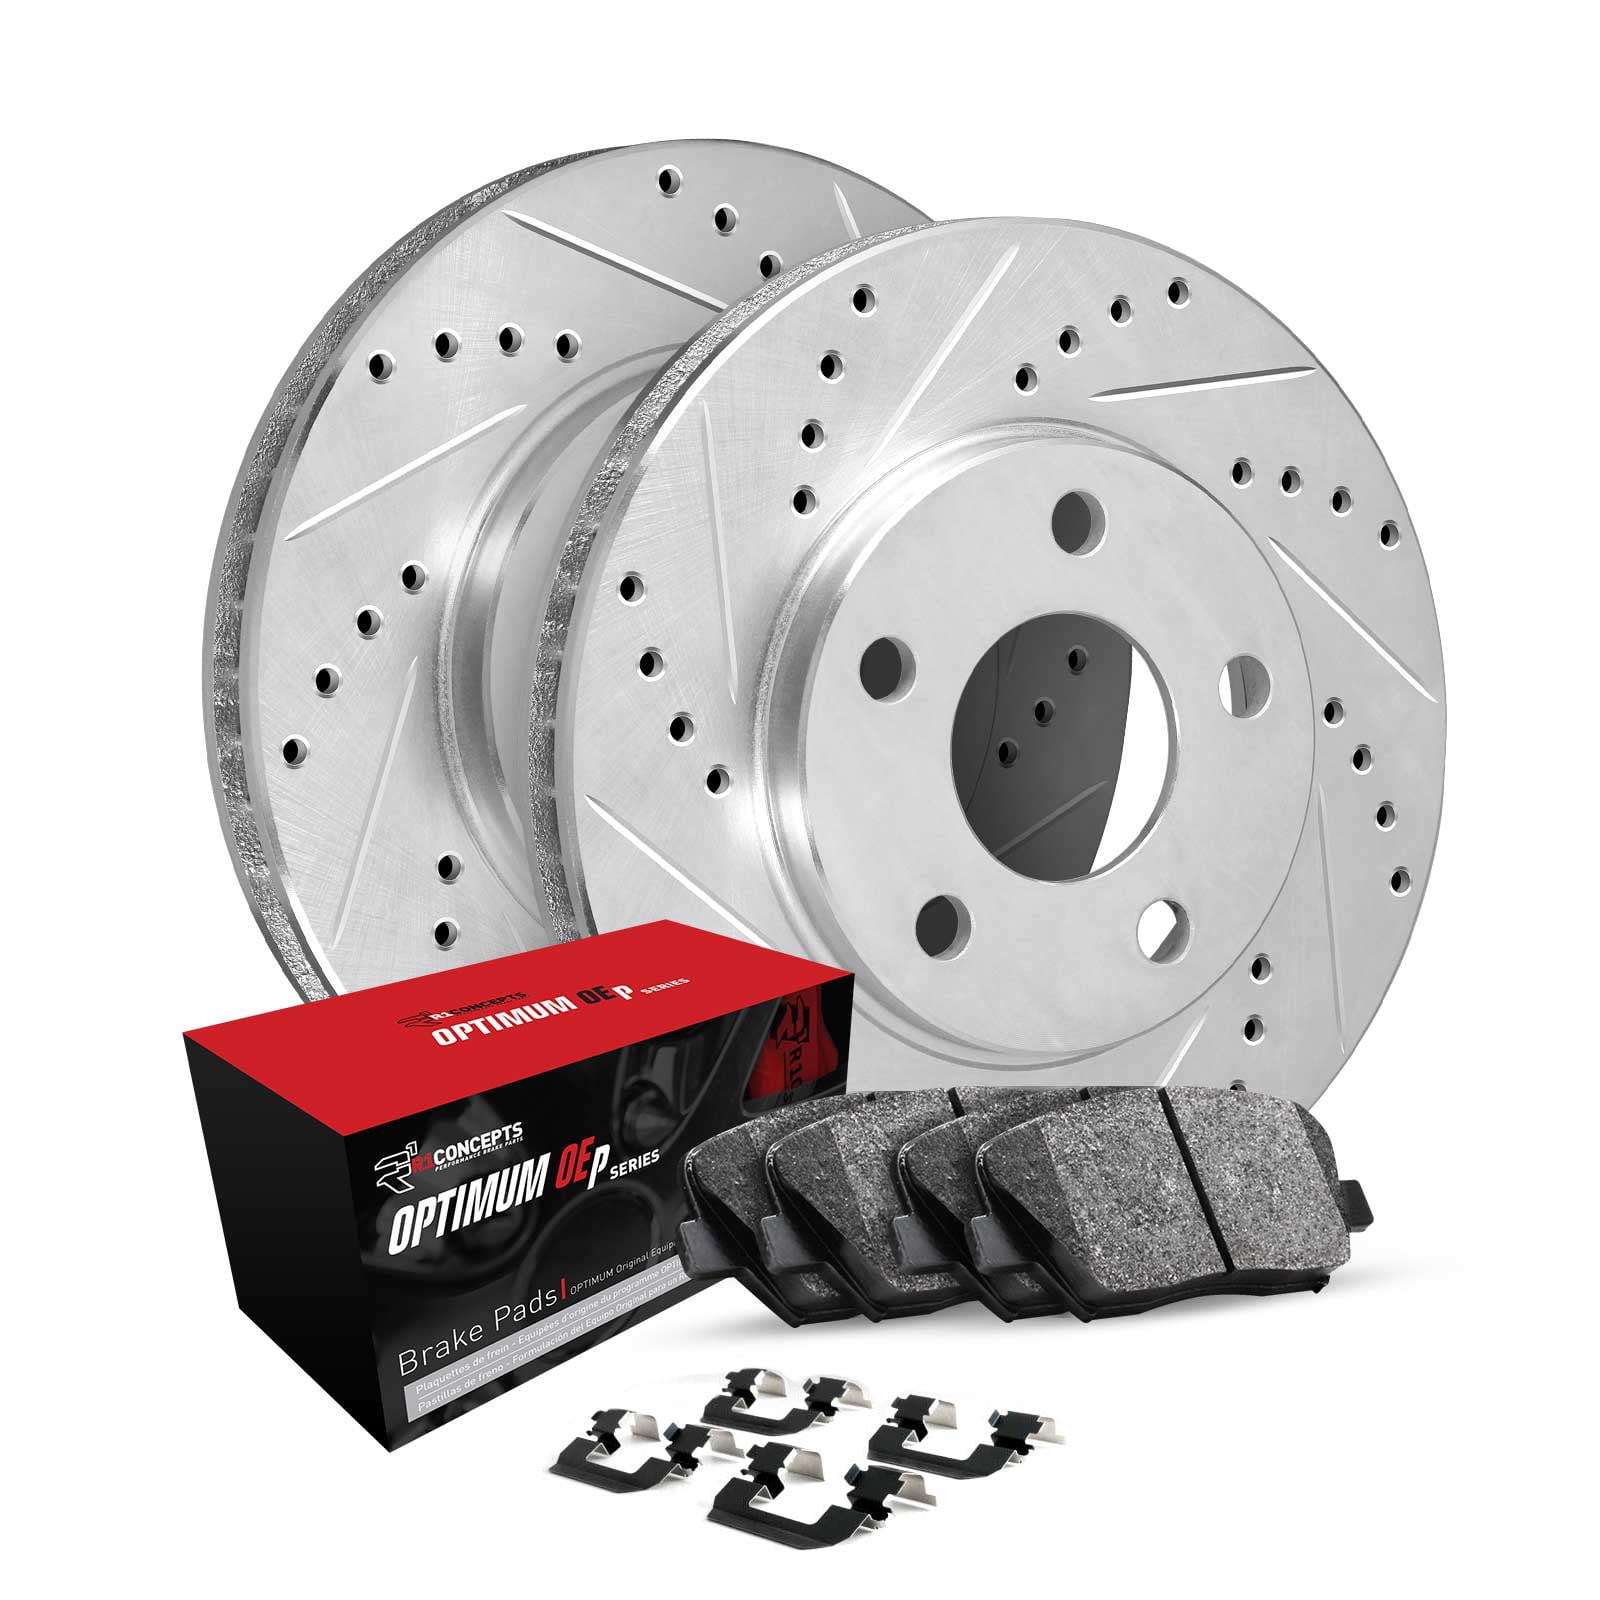 R1 Concepts Front Brakes and Rotors Kit |Front Brake Pads| Brake Rotors and  Pads| Optimum OEp Brake Pads and Rotors| Hardware Kit WGUH1-45027 -  